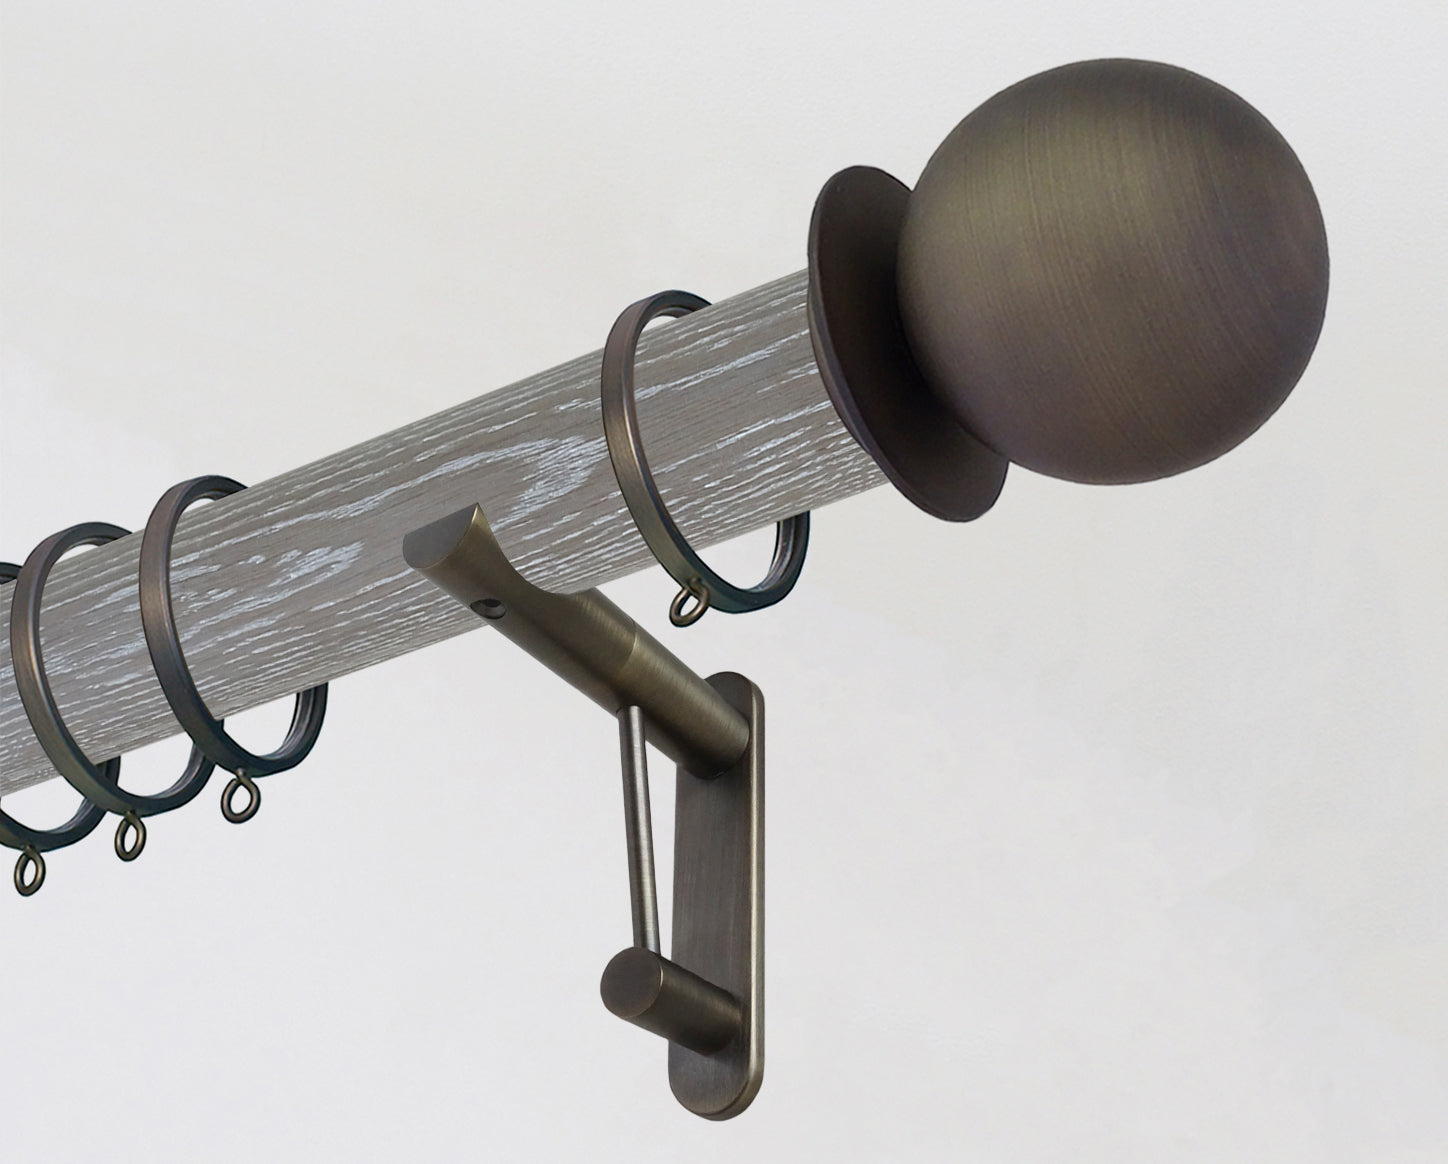 50mm dia. smoked real oak wood curtain pole set with metal ball finials